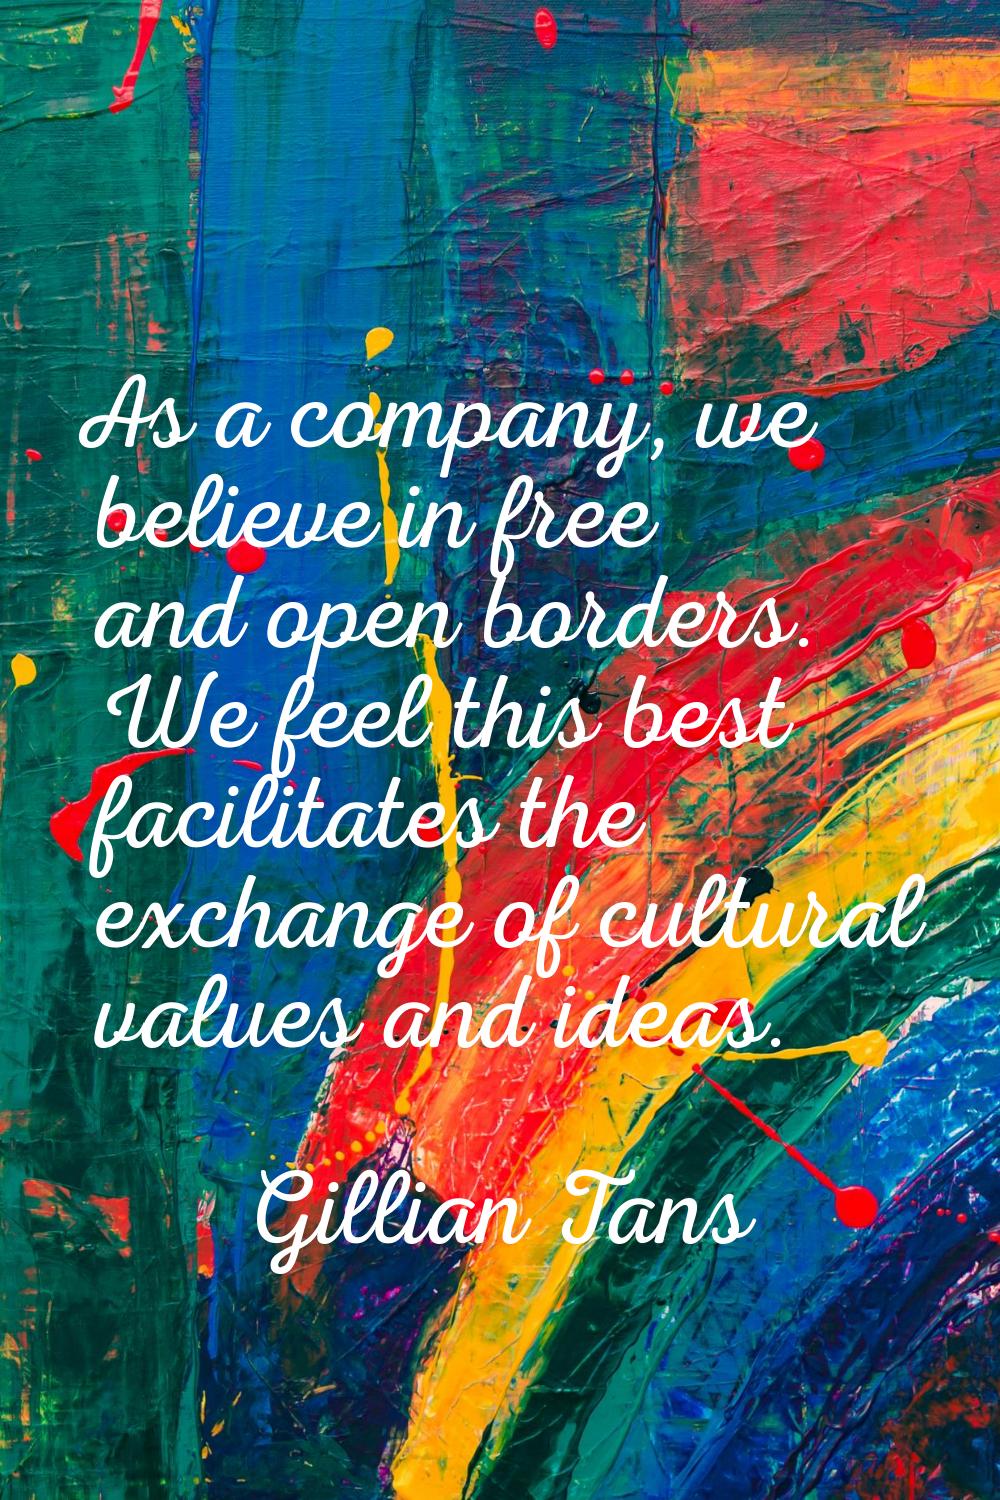 As a company, we believe in free and open borders. We feel this best facilitates the exchange of cu